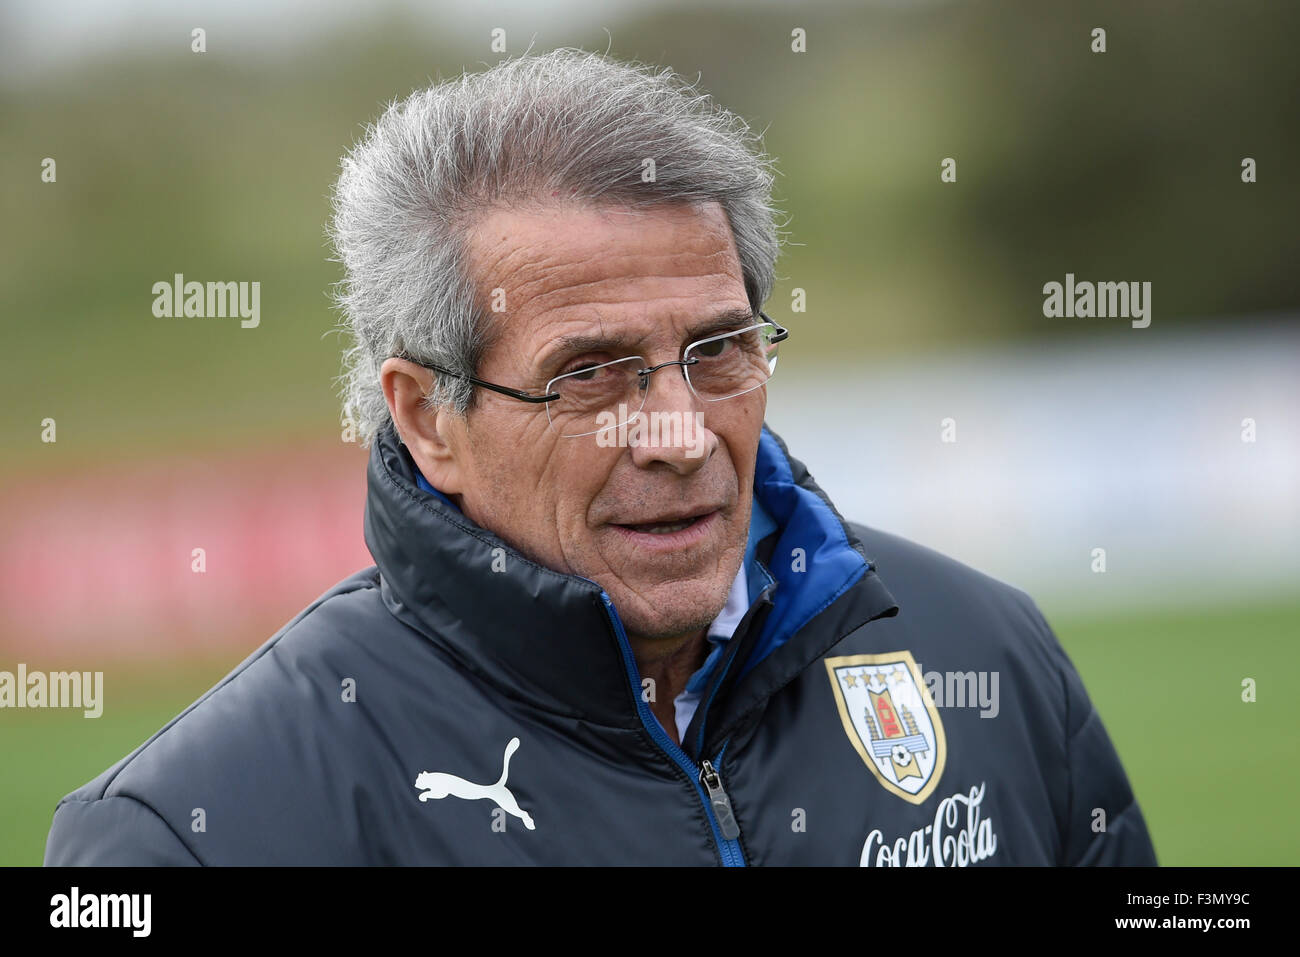 Canelones, Uruguay. 9th Oct, 2015. Oscar Washington Tabarez, head coach of Uruguay's national soccer team, attends a training session in Canelones, Uruguay, on Oct. 9, 2015. Uruguay will face Colombia on Oct. 13 in a qualification match of the FIFA Russia 2018 World Cup. © Nicolas Celaya/Xinhua/Alamy Live News Stock Photo